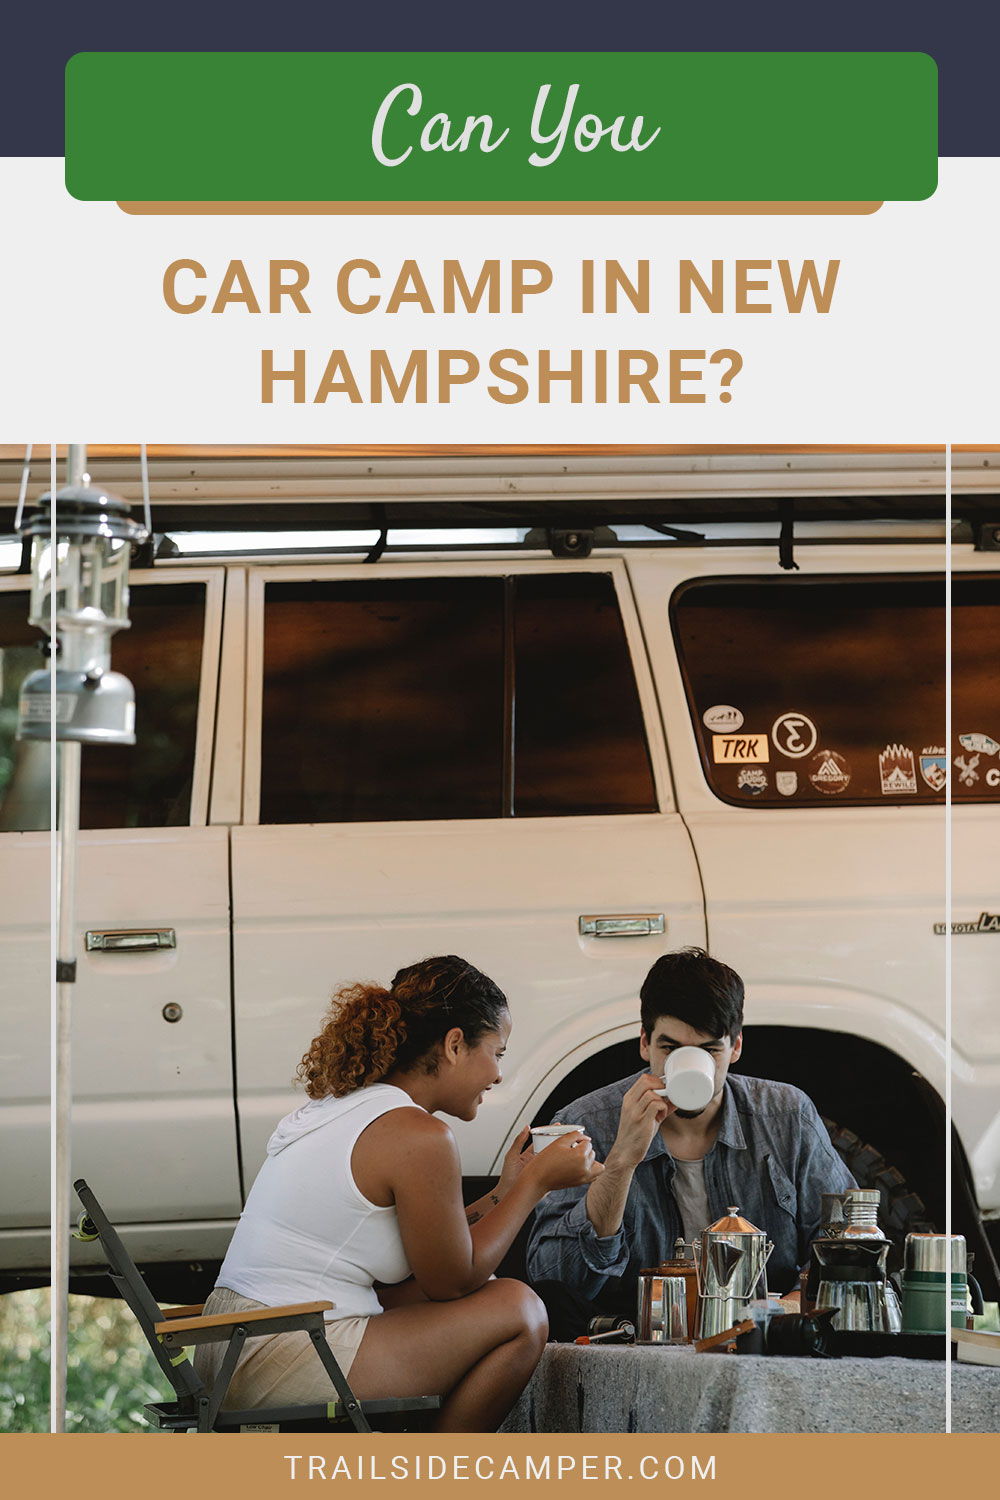 Can You Car Camp in New Hampshire?